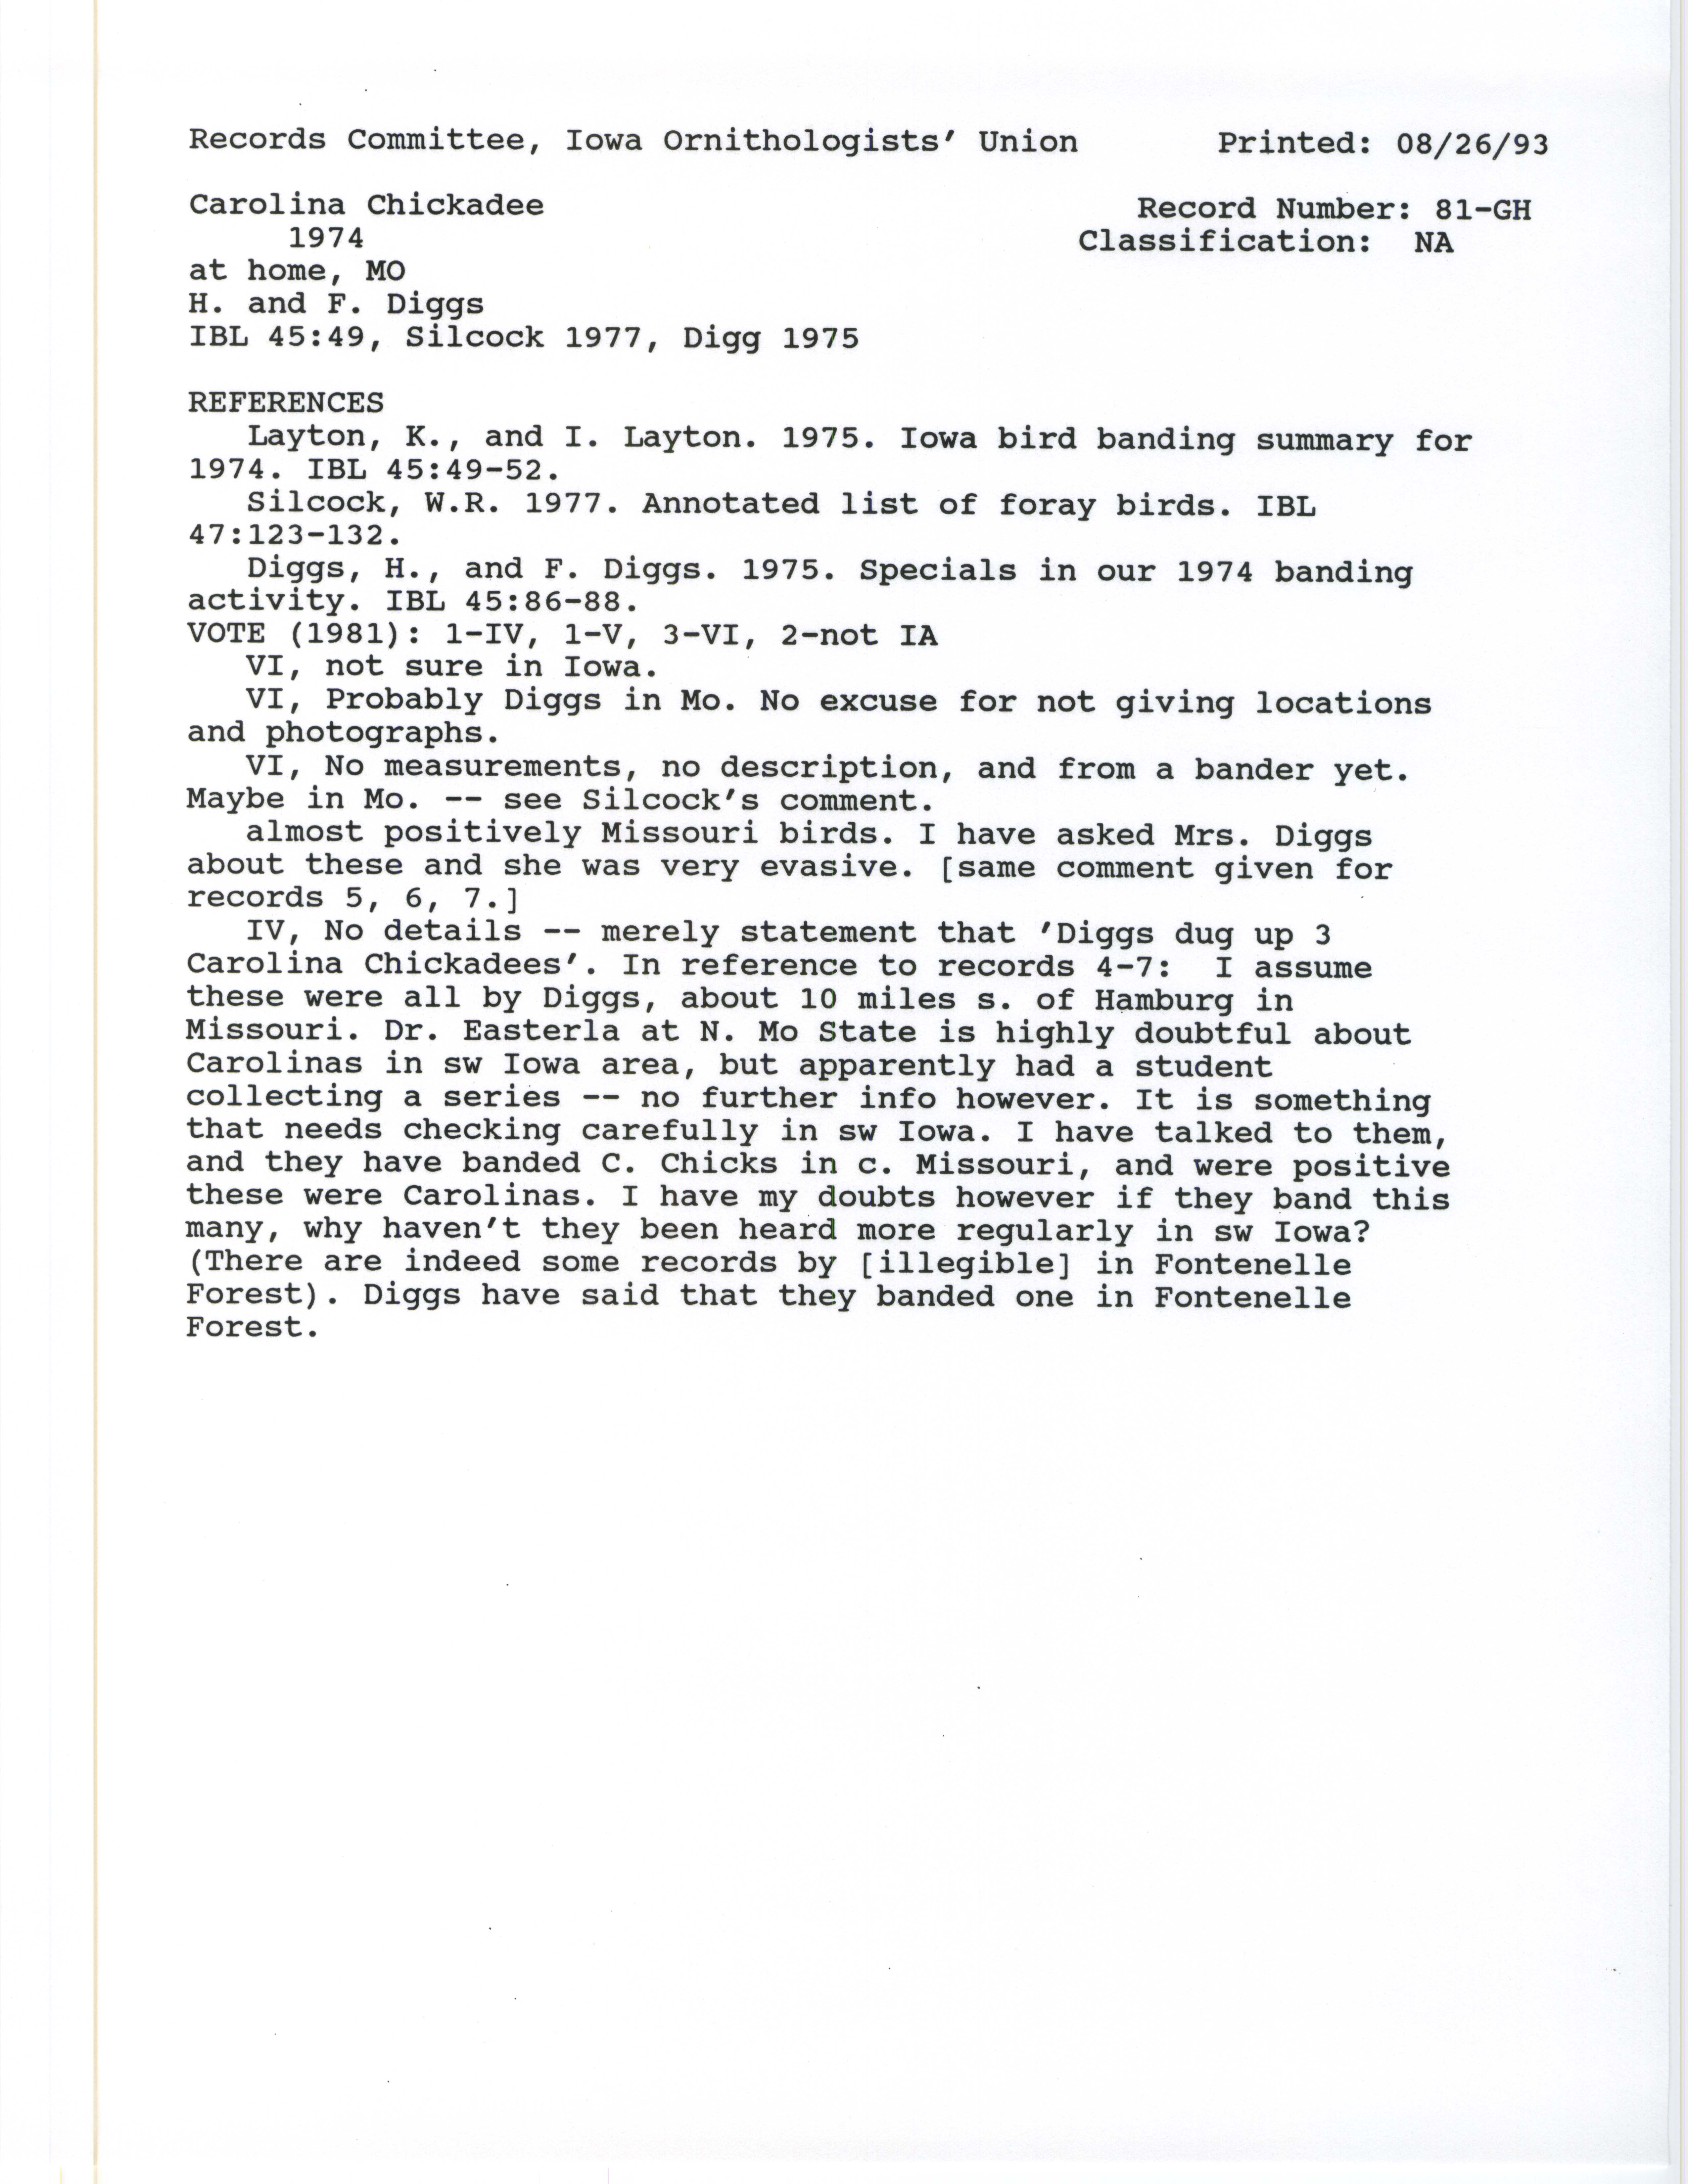 Records Committee review for rare bird sighting for Carolina Chickadee south of Hamburg in 1974